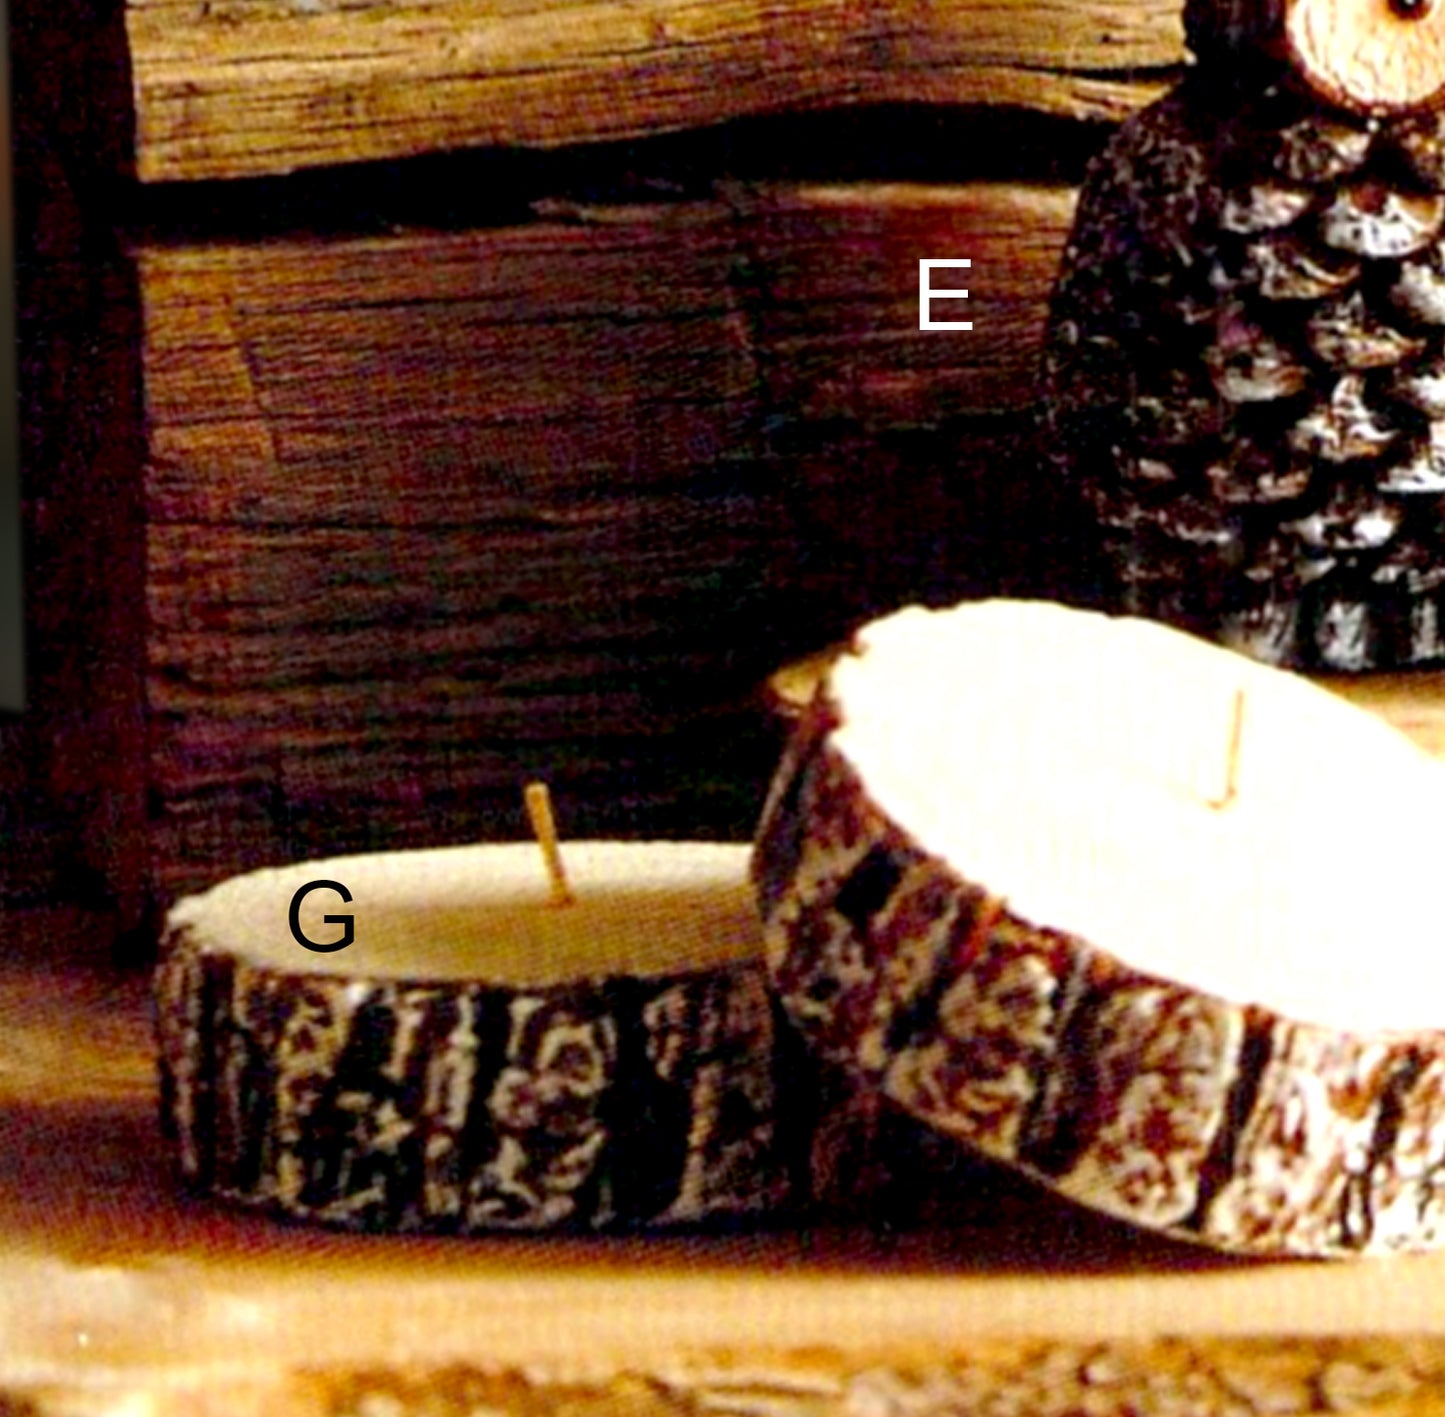 Roost Owl Pine Cone & Log Slice Candles-8